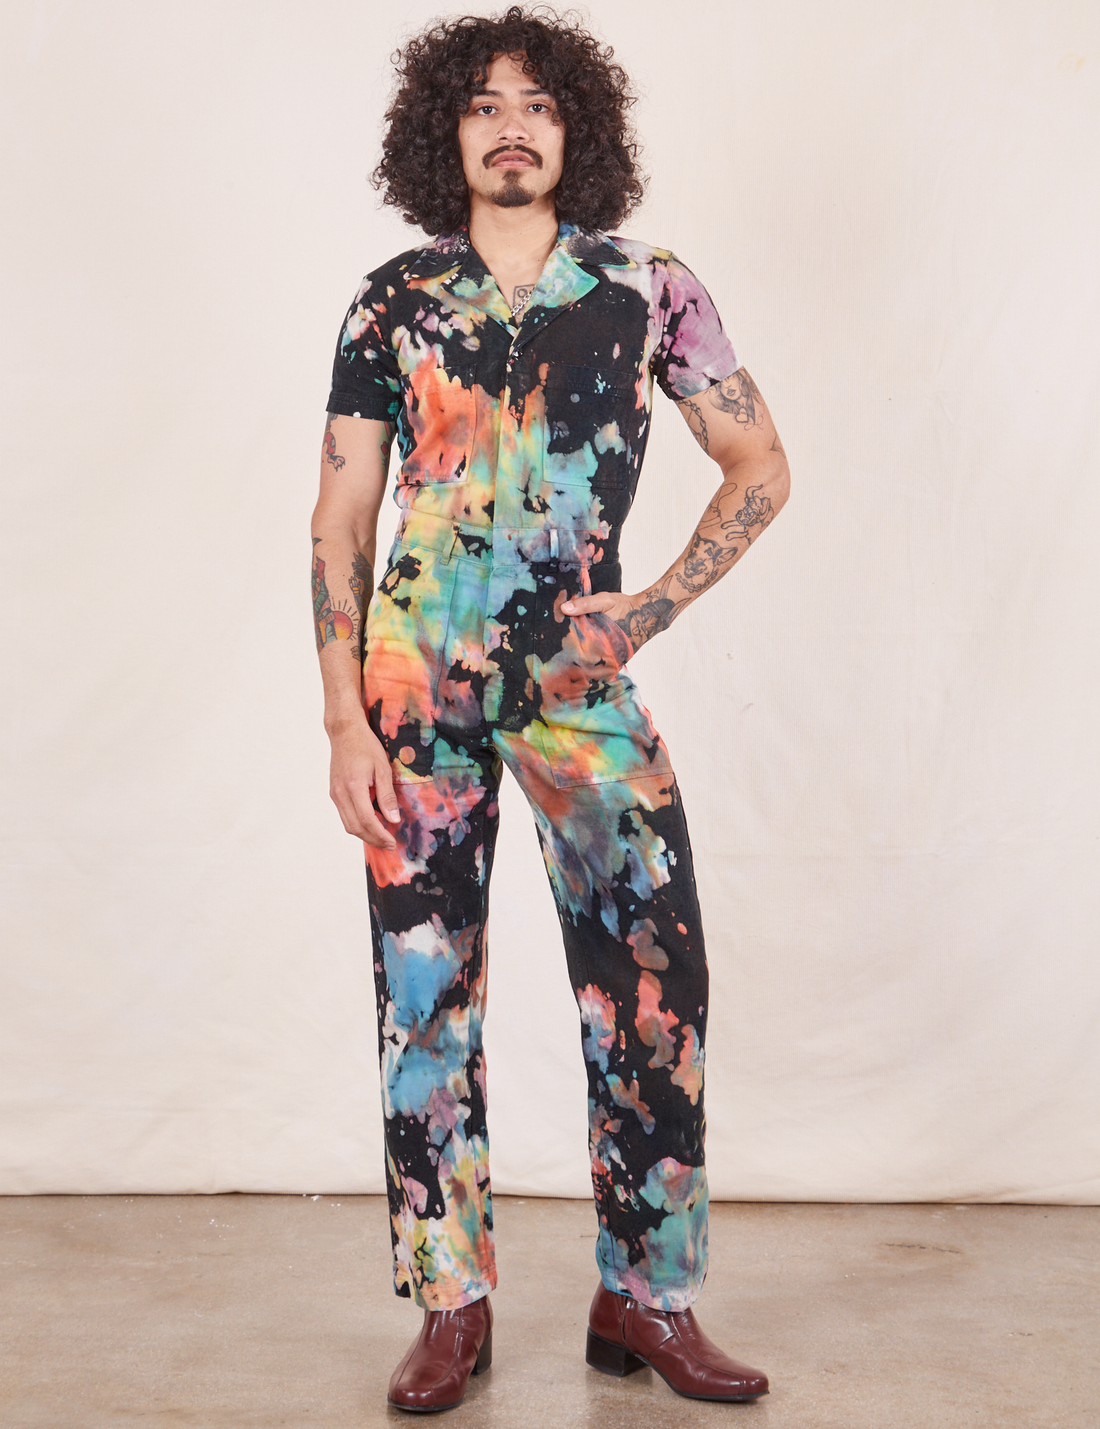 Jesse is 5'8" and wearing size S Short Sleeve Jumpsuit in Rainbow Magic Waters